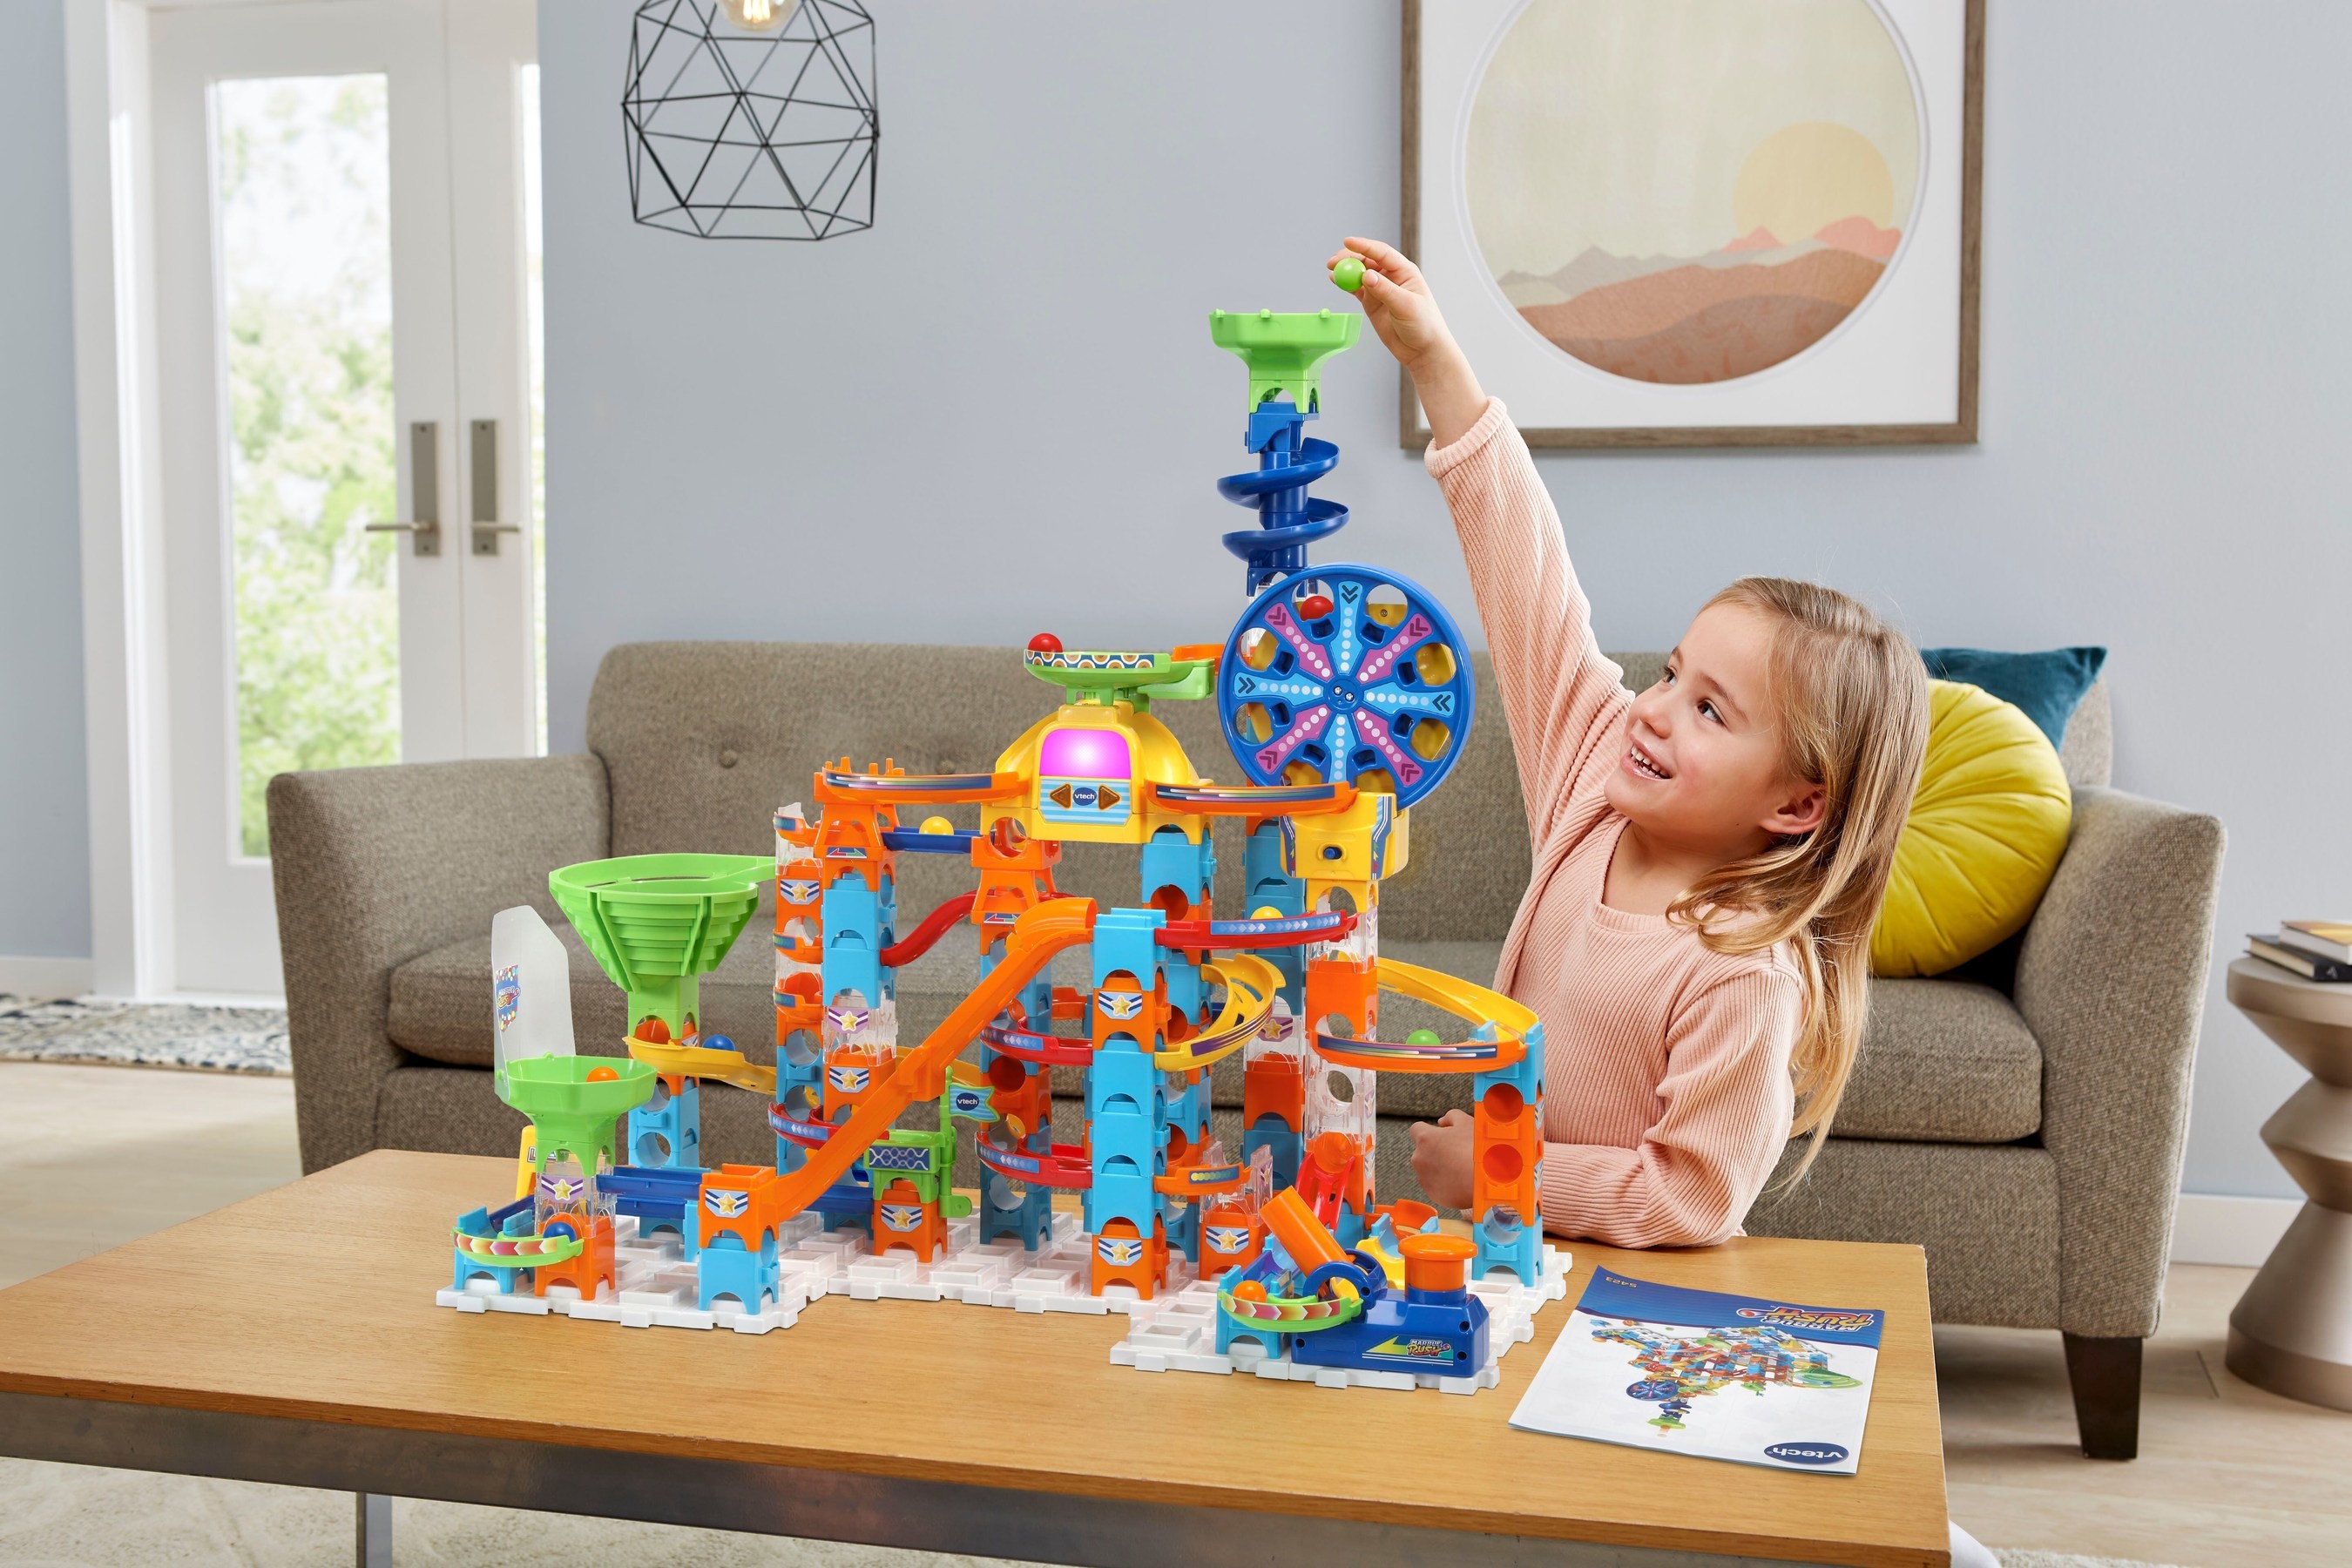 VTech Offers Non-Stop Action with Introduction of New Marble Rush